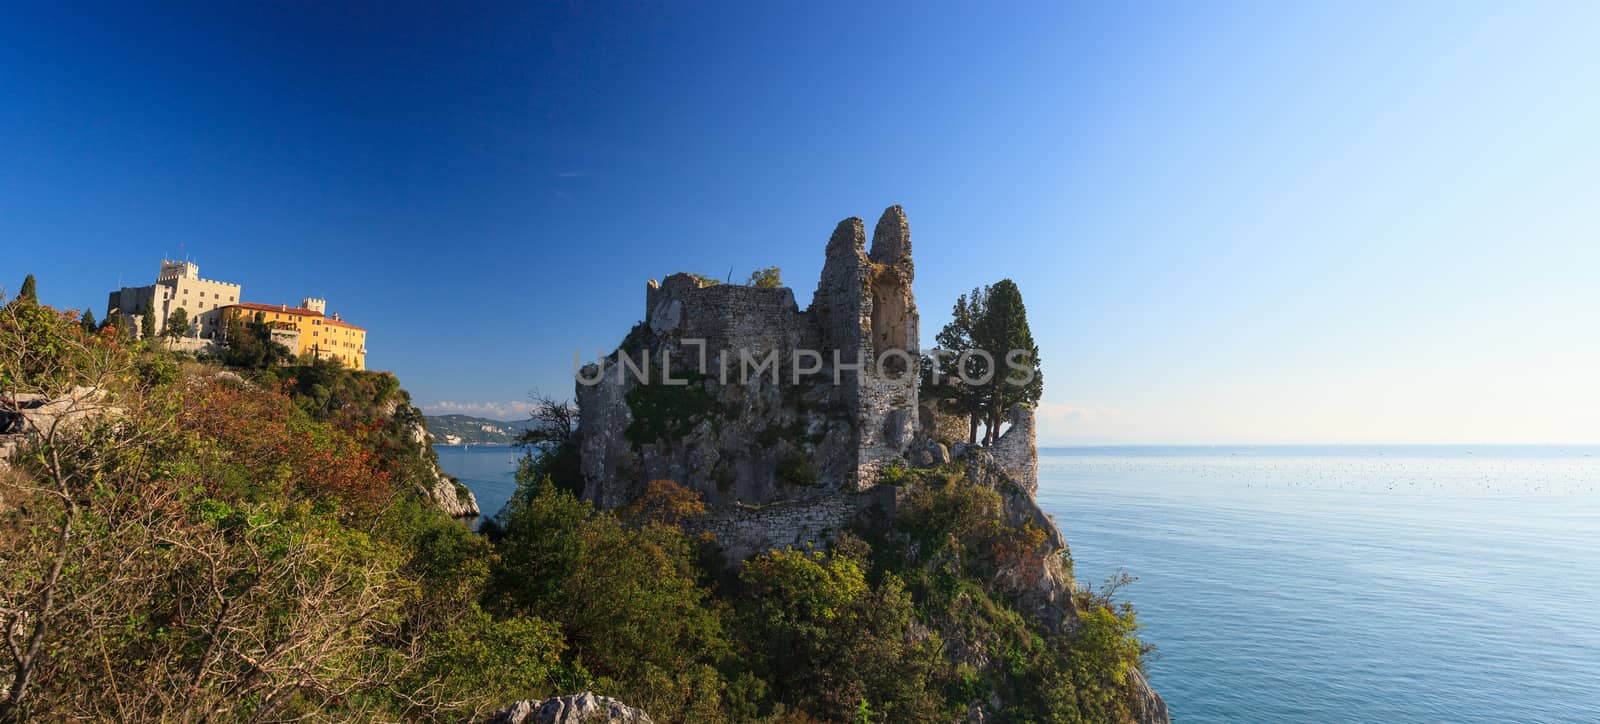 Old and new castle, Duino by bepsimage